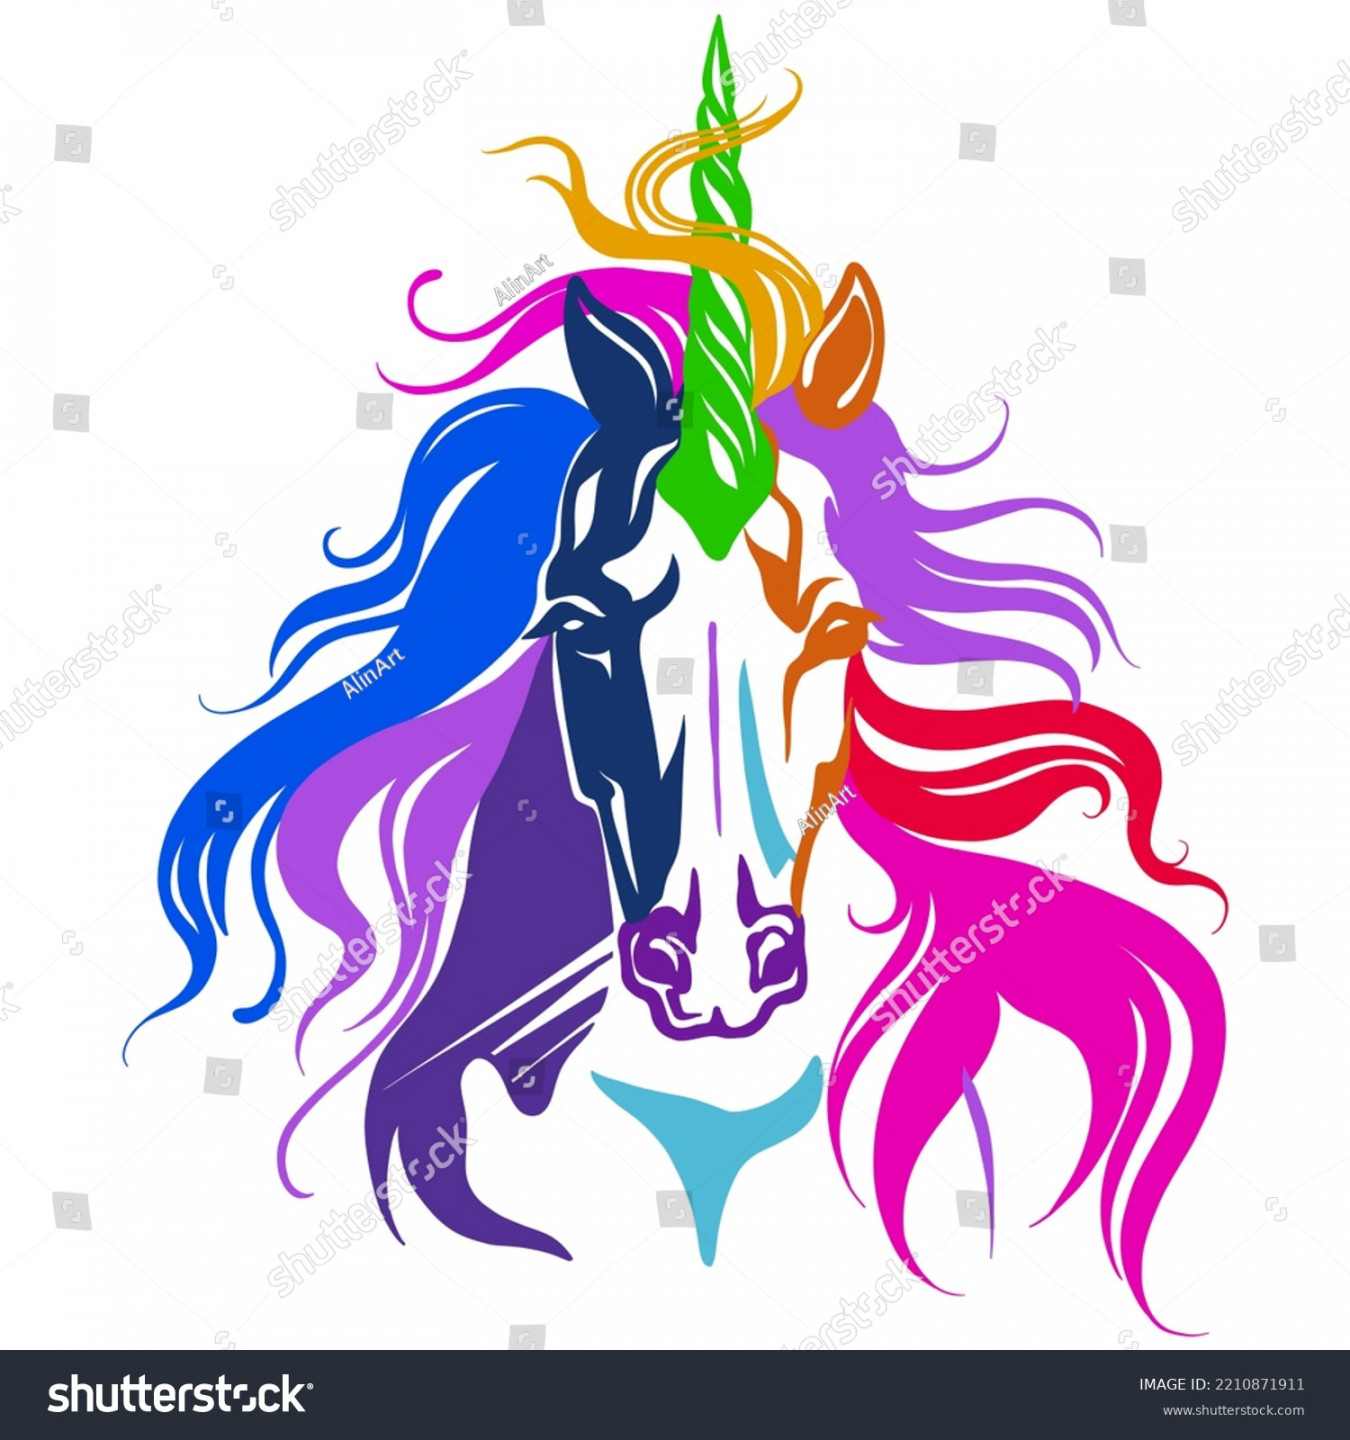 , Unicorn Front View Images, Stock Photos, D objects